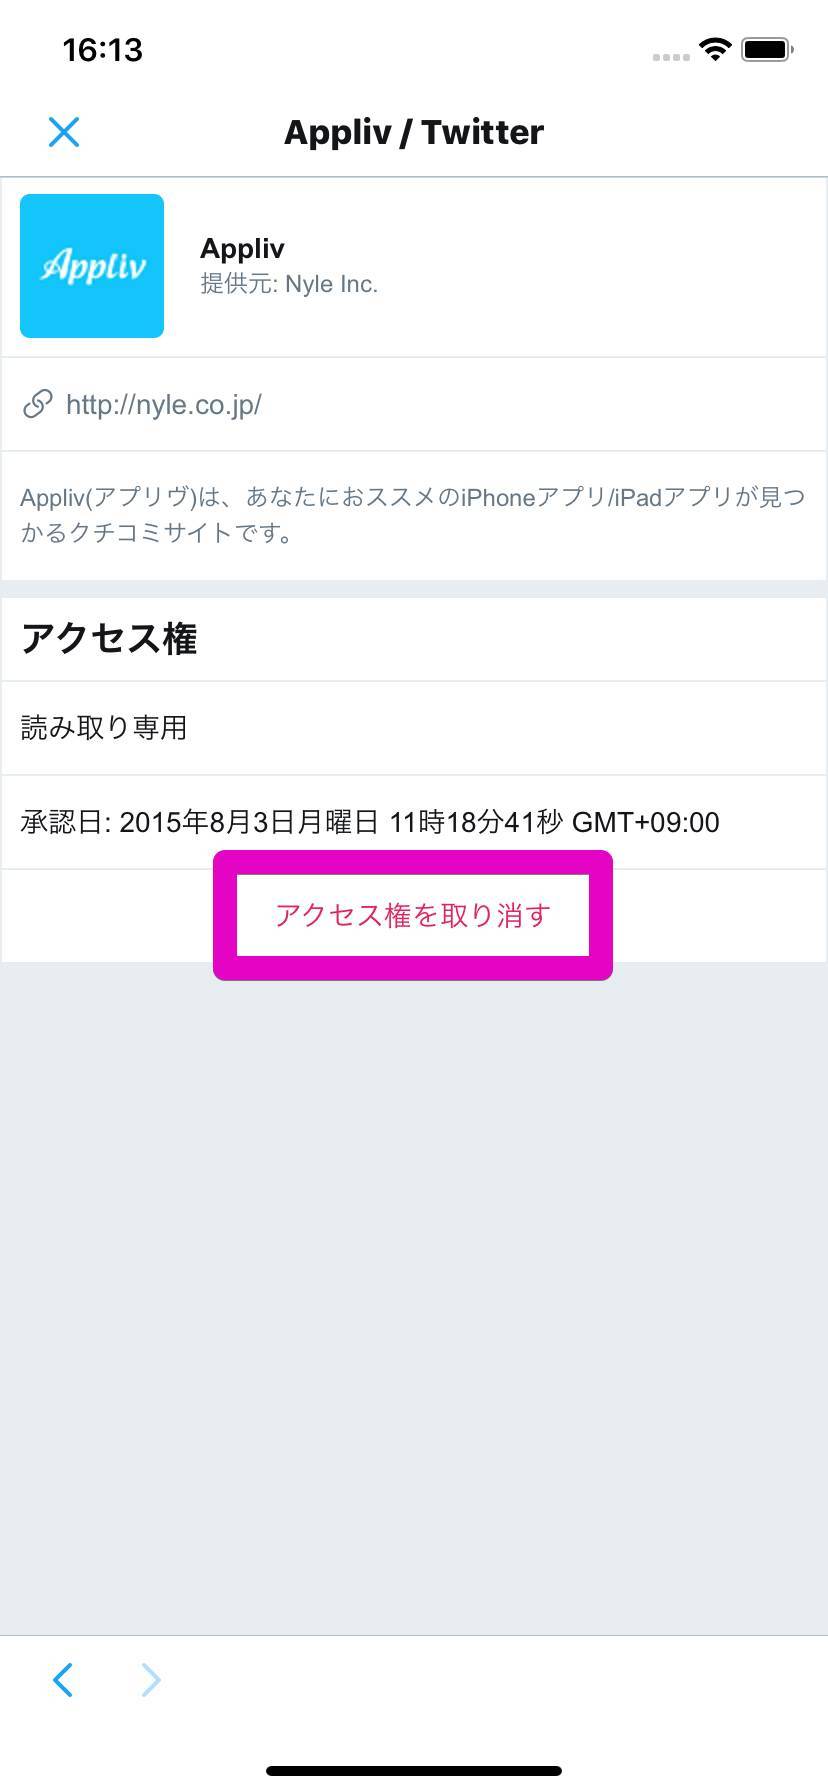 Twitter アプリ連携の解除方法 乗っ取り対策に Iphone Android Pc Appliv Topics